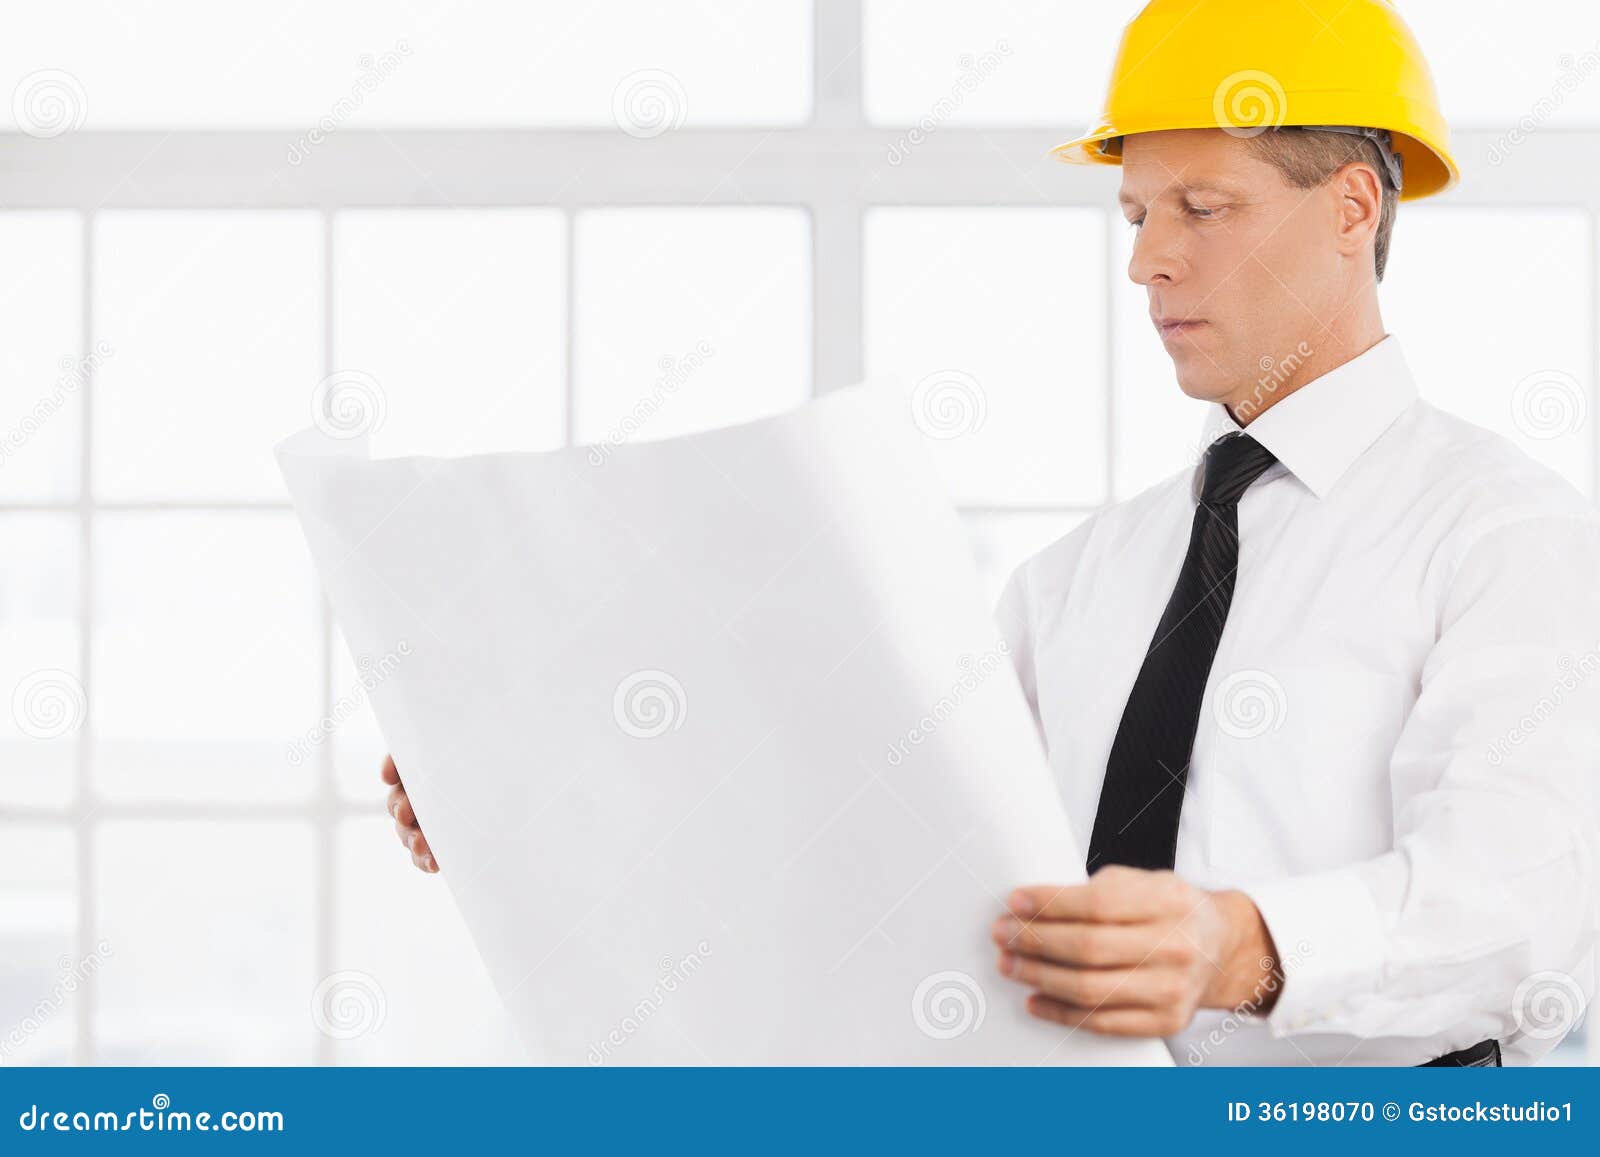 Architect at work. stock photo. Image of adult, collar ...
